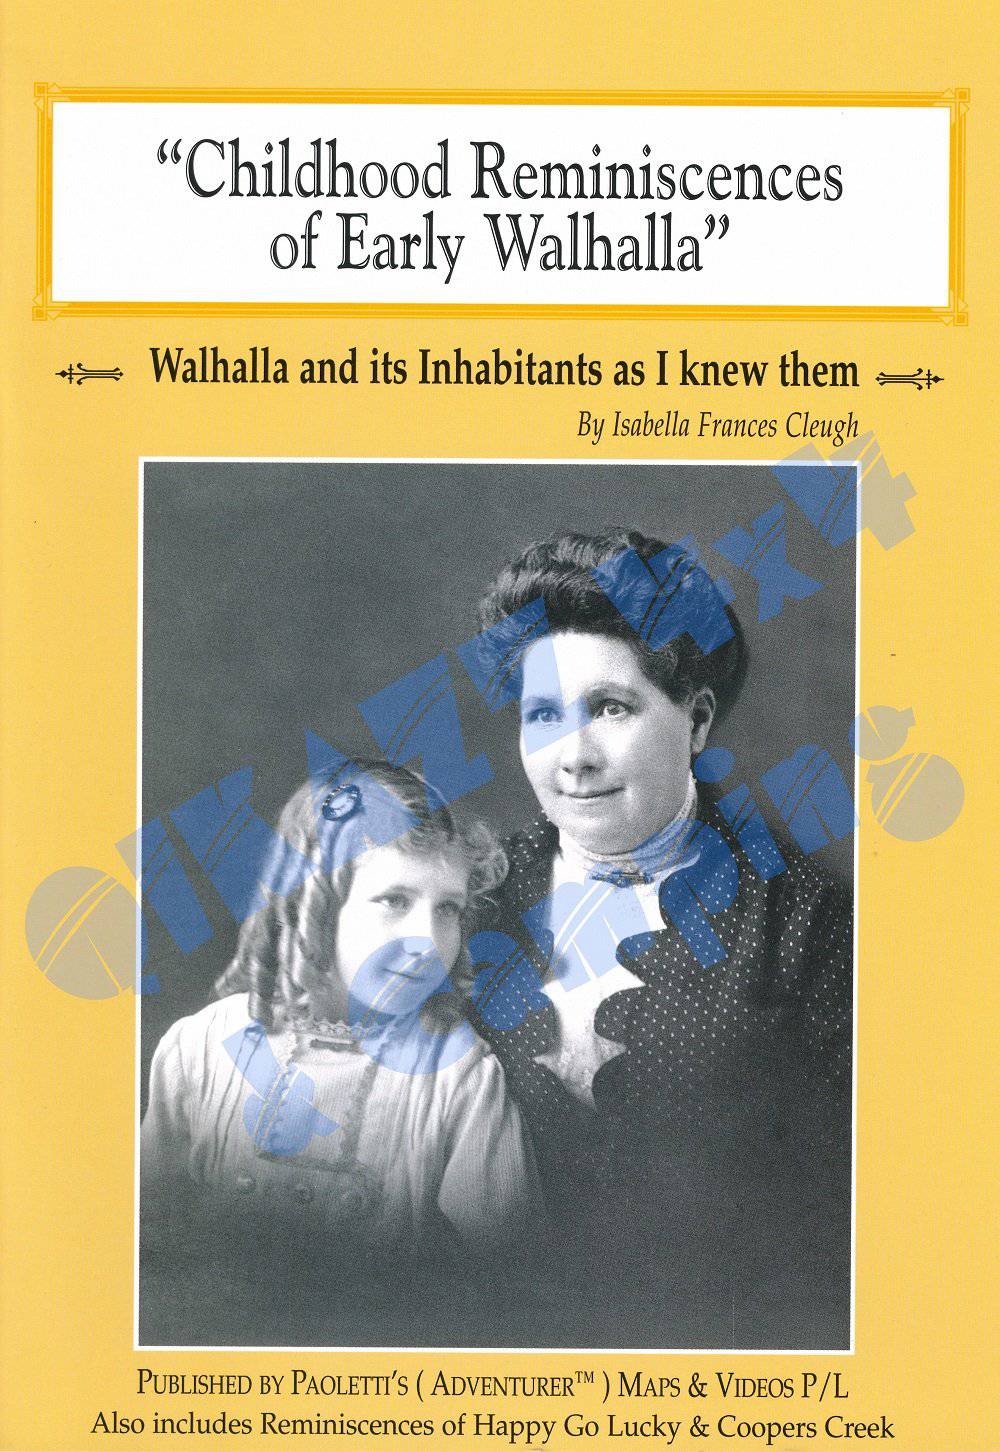 Childhood Reminiscences of Early Walhalla by Isabella Francis Cleugh | Adventurer Maps